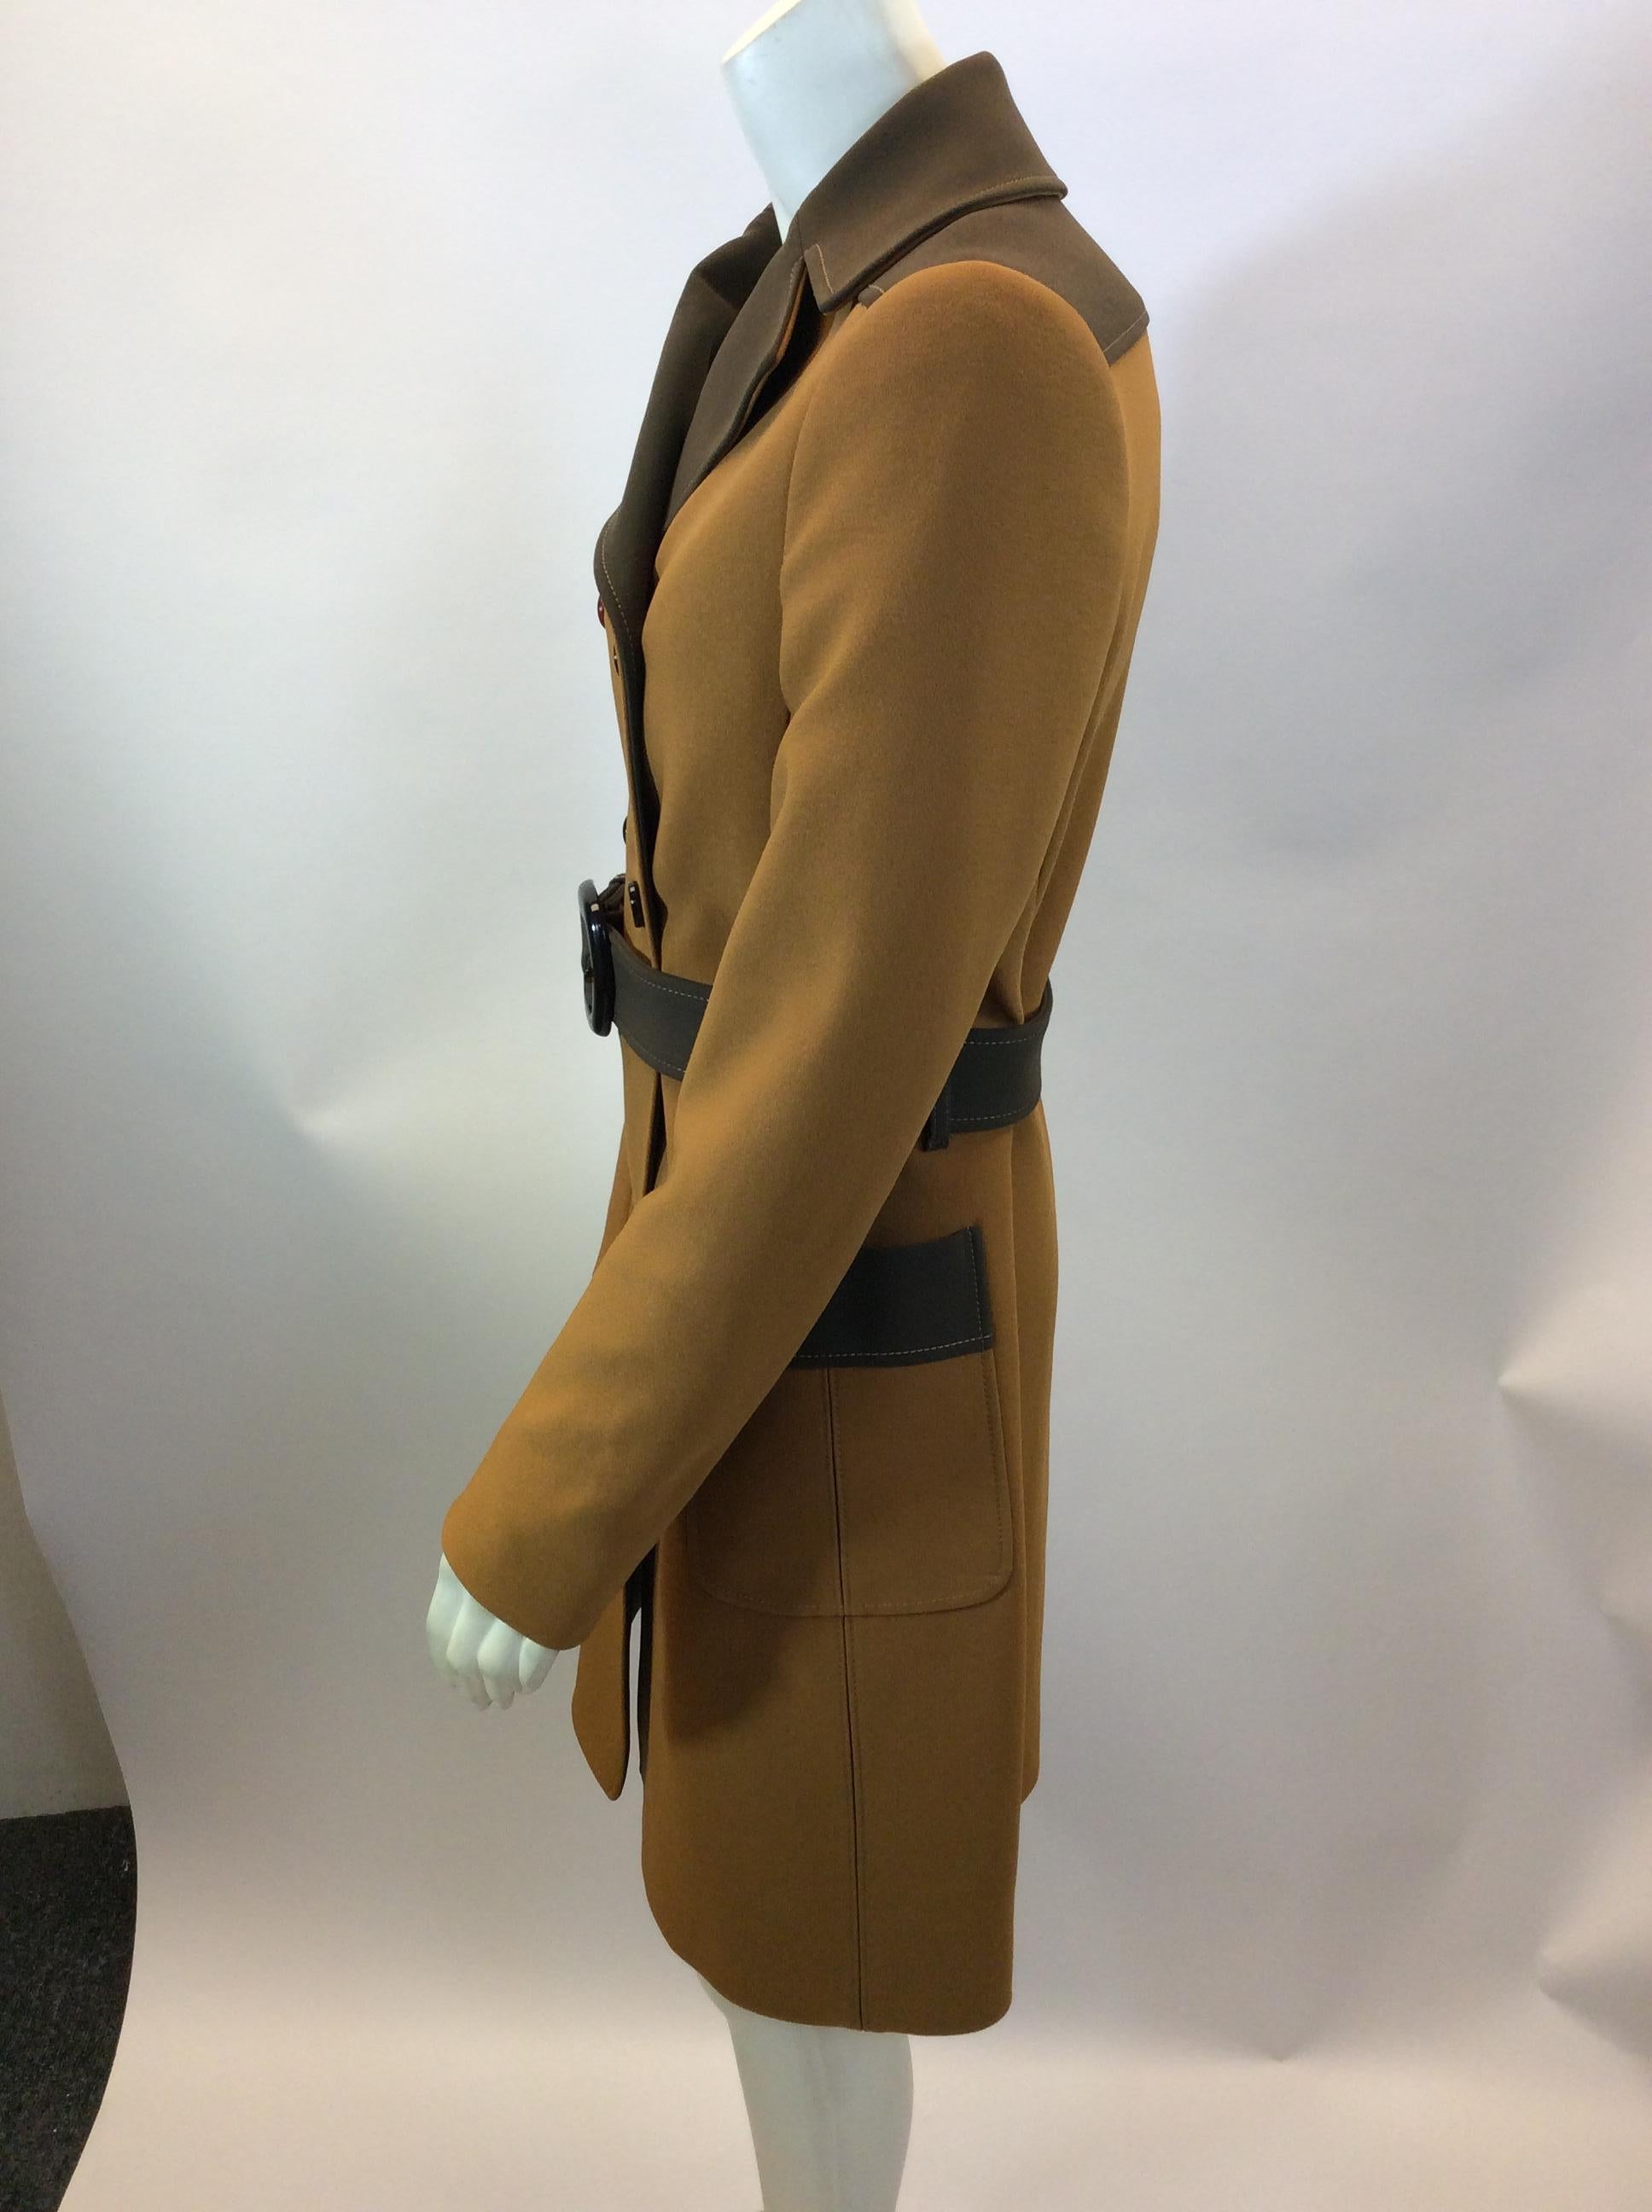 Prada Tan and Brown Belted Coat
$650
Made in Italy
Size 42
Length 35.5